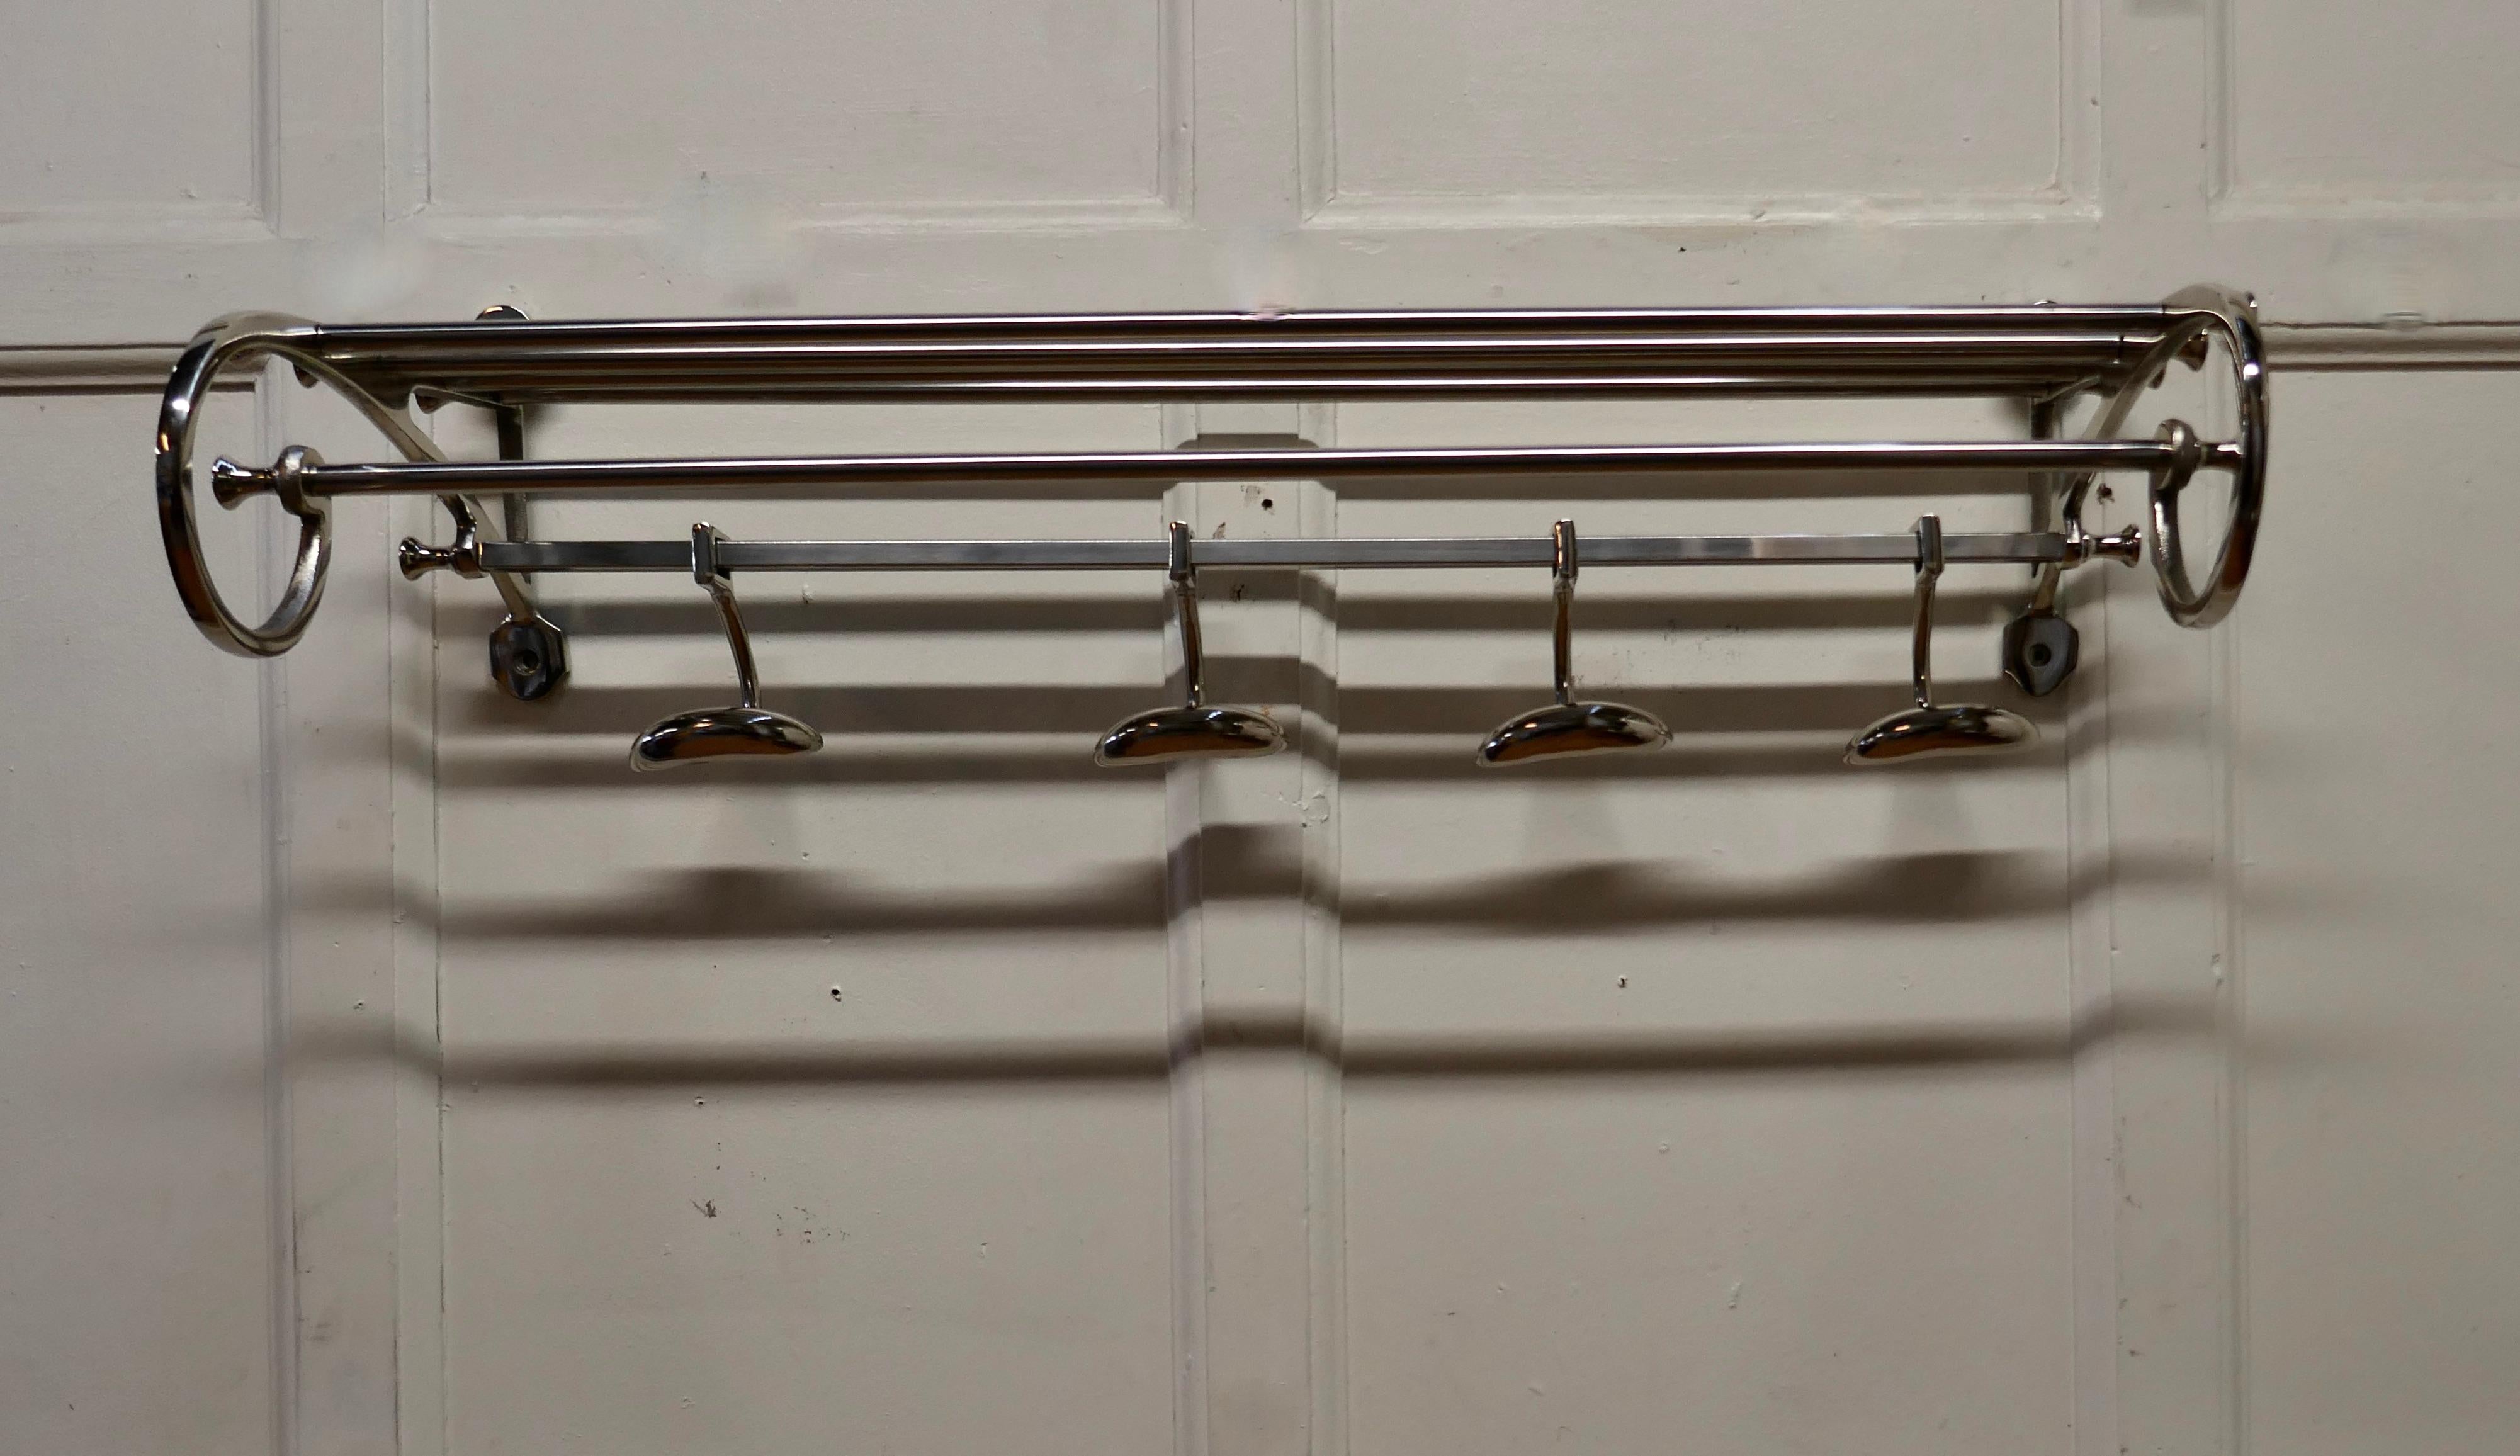 French Art Deco Style Hat and Coat Rack, Pullman Railway Train Style

 This Art Deco style hat and coat rack has four sliding hooks and an upper railed shelf 
Racks just like these were used on French railway trains just like the ones on “the